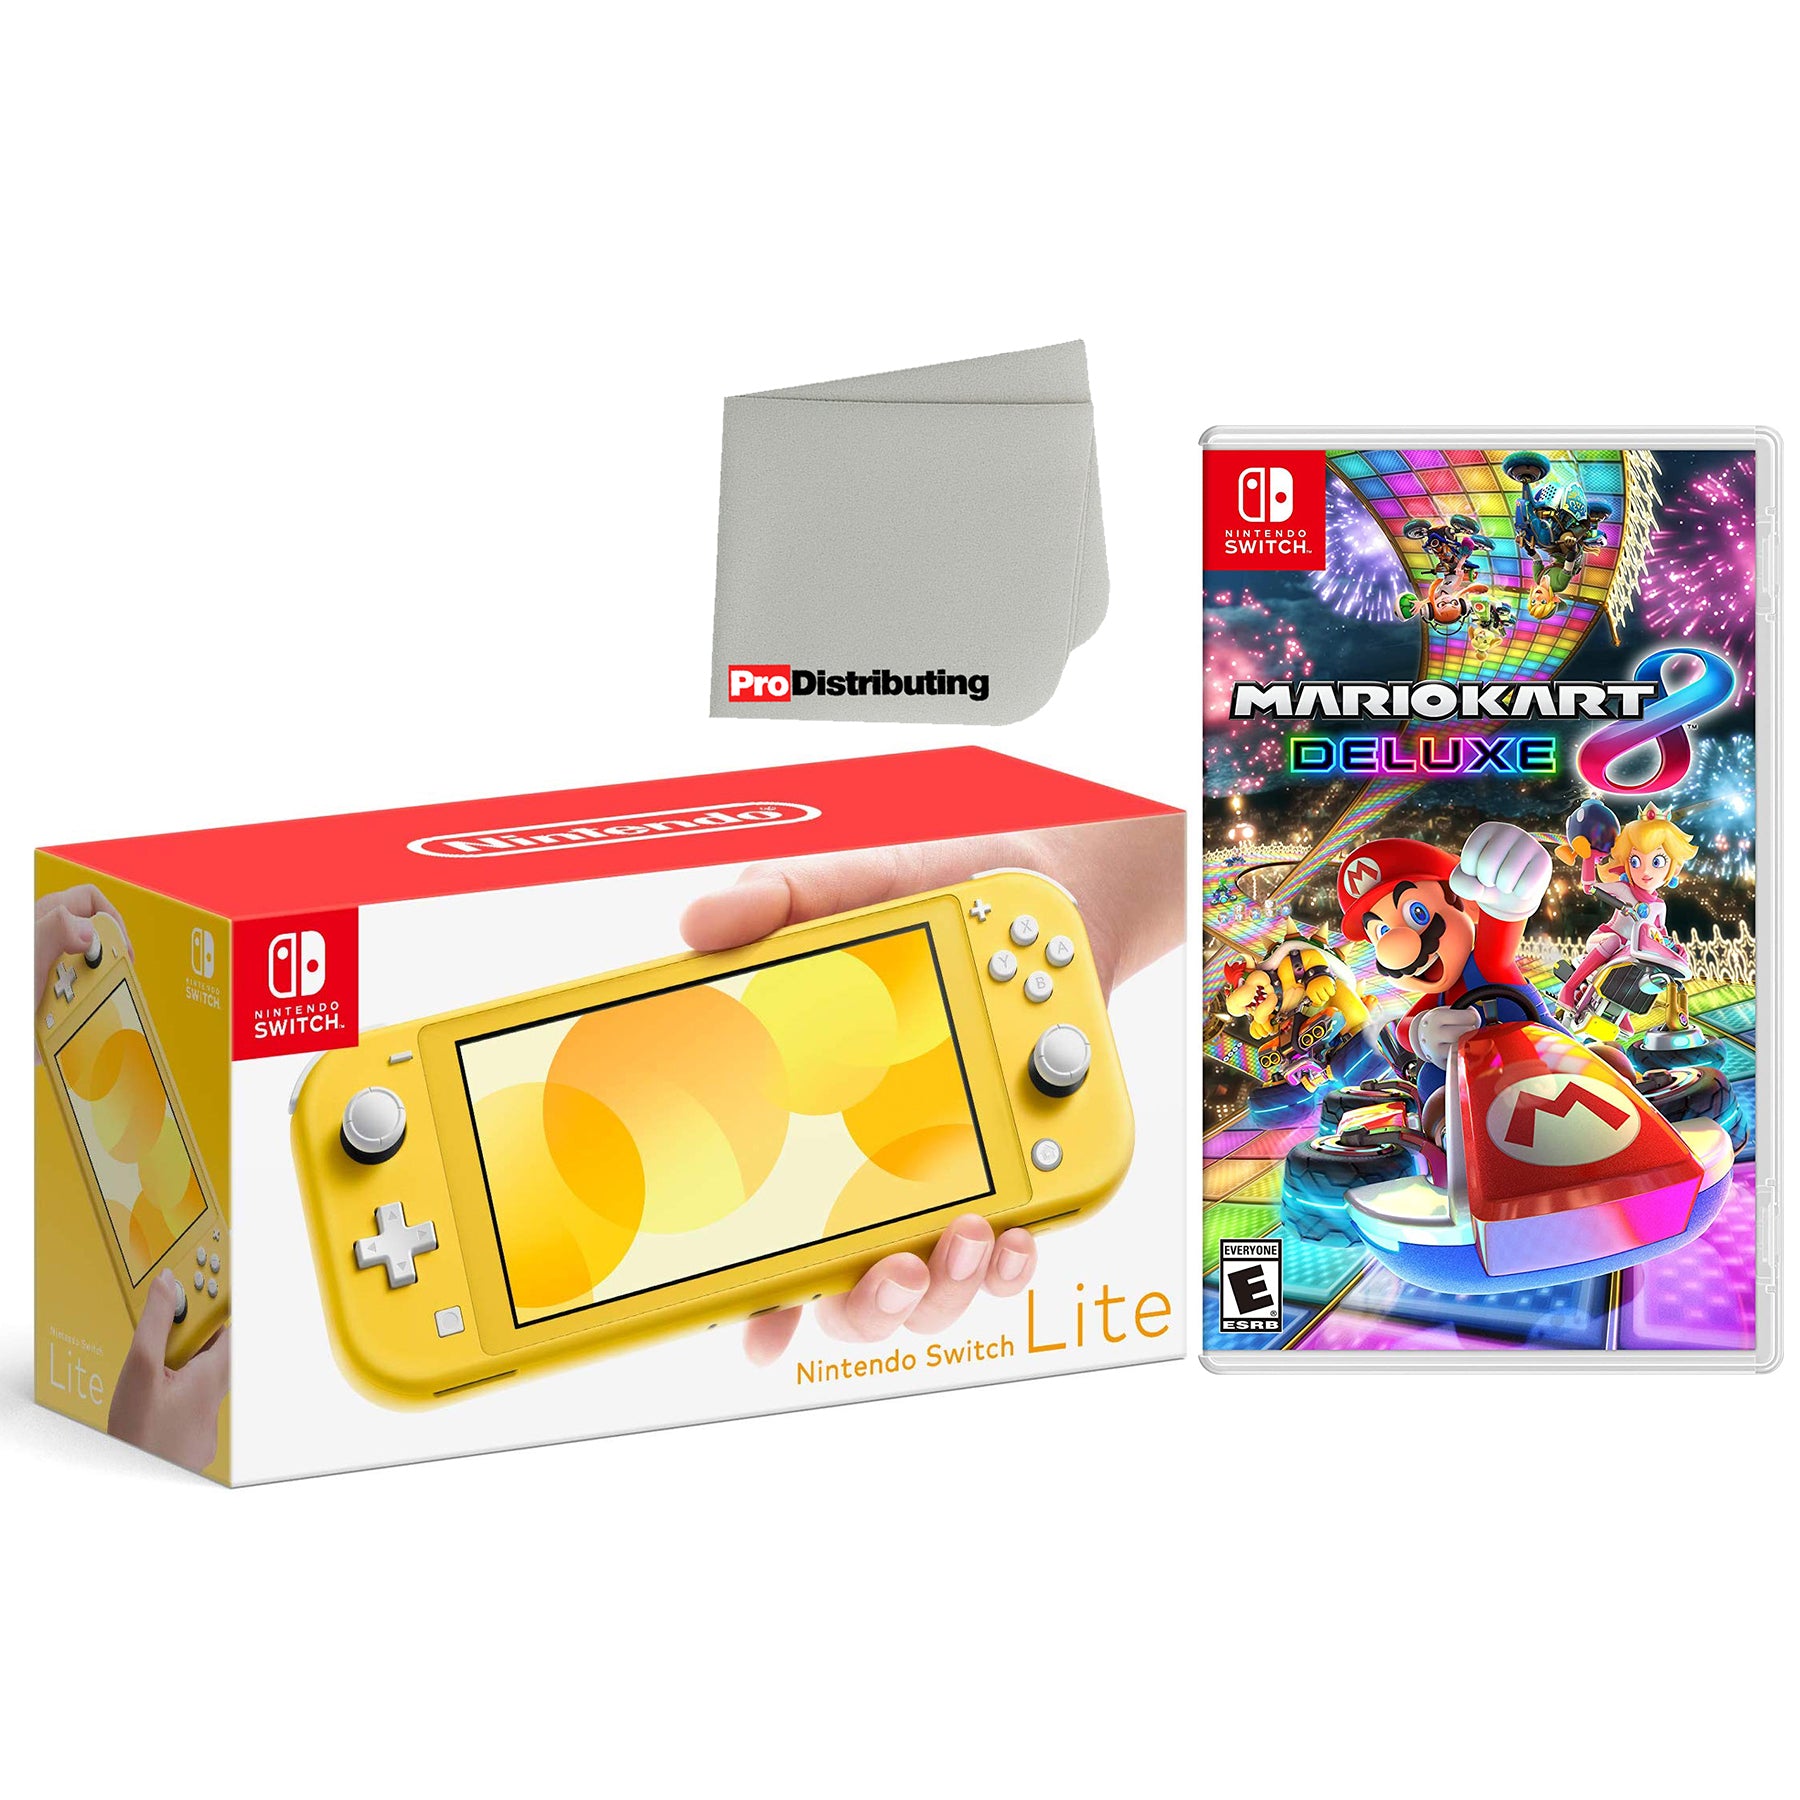 Nintendo Switch Lite Yellow ，Turquoise 5.5 inch LCD Touch Screen 32GB  Built-in + Control Pad Compatible All Nintendo Switch Game